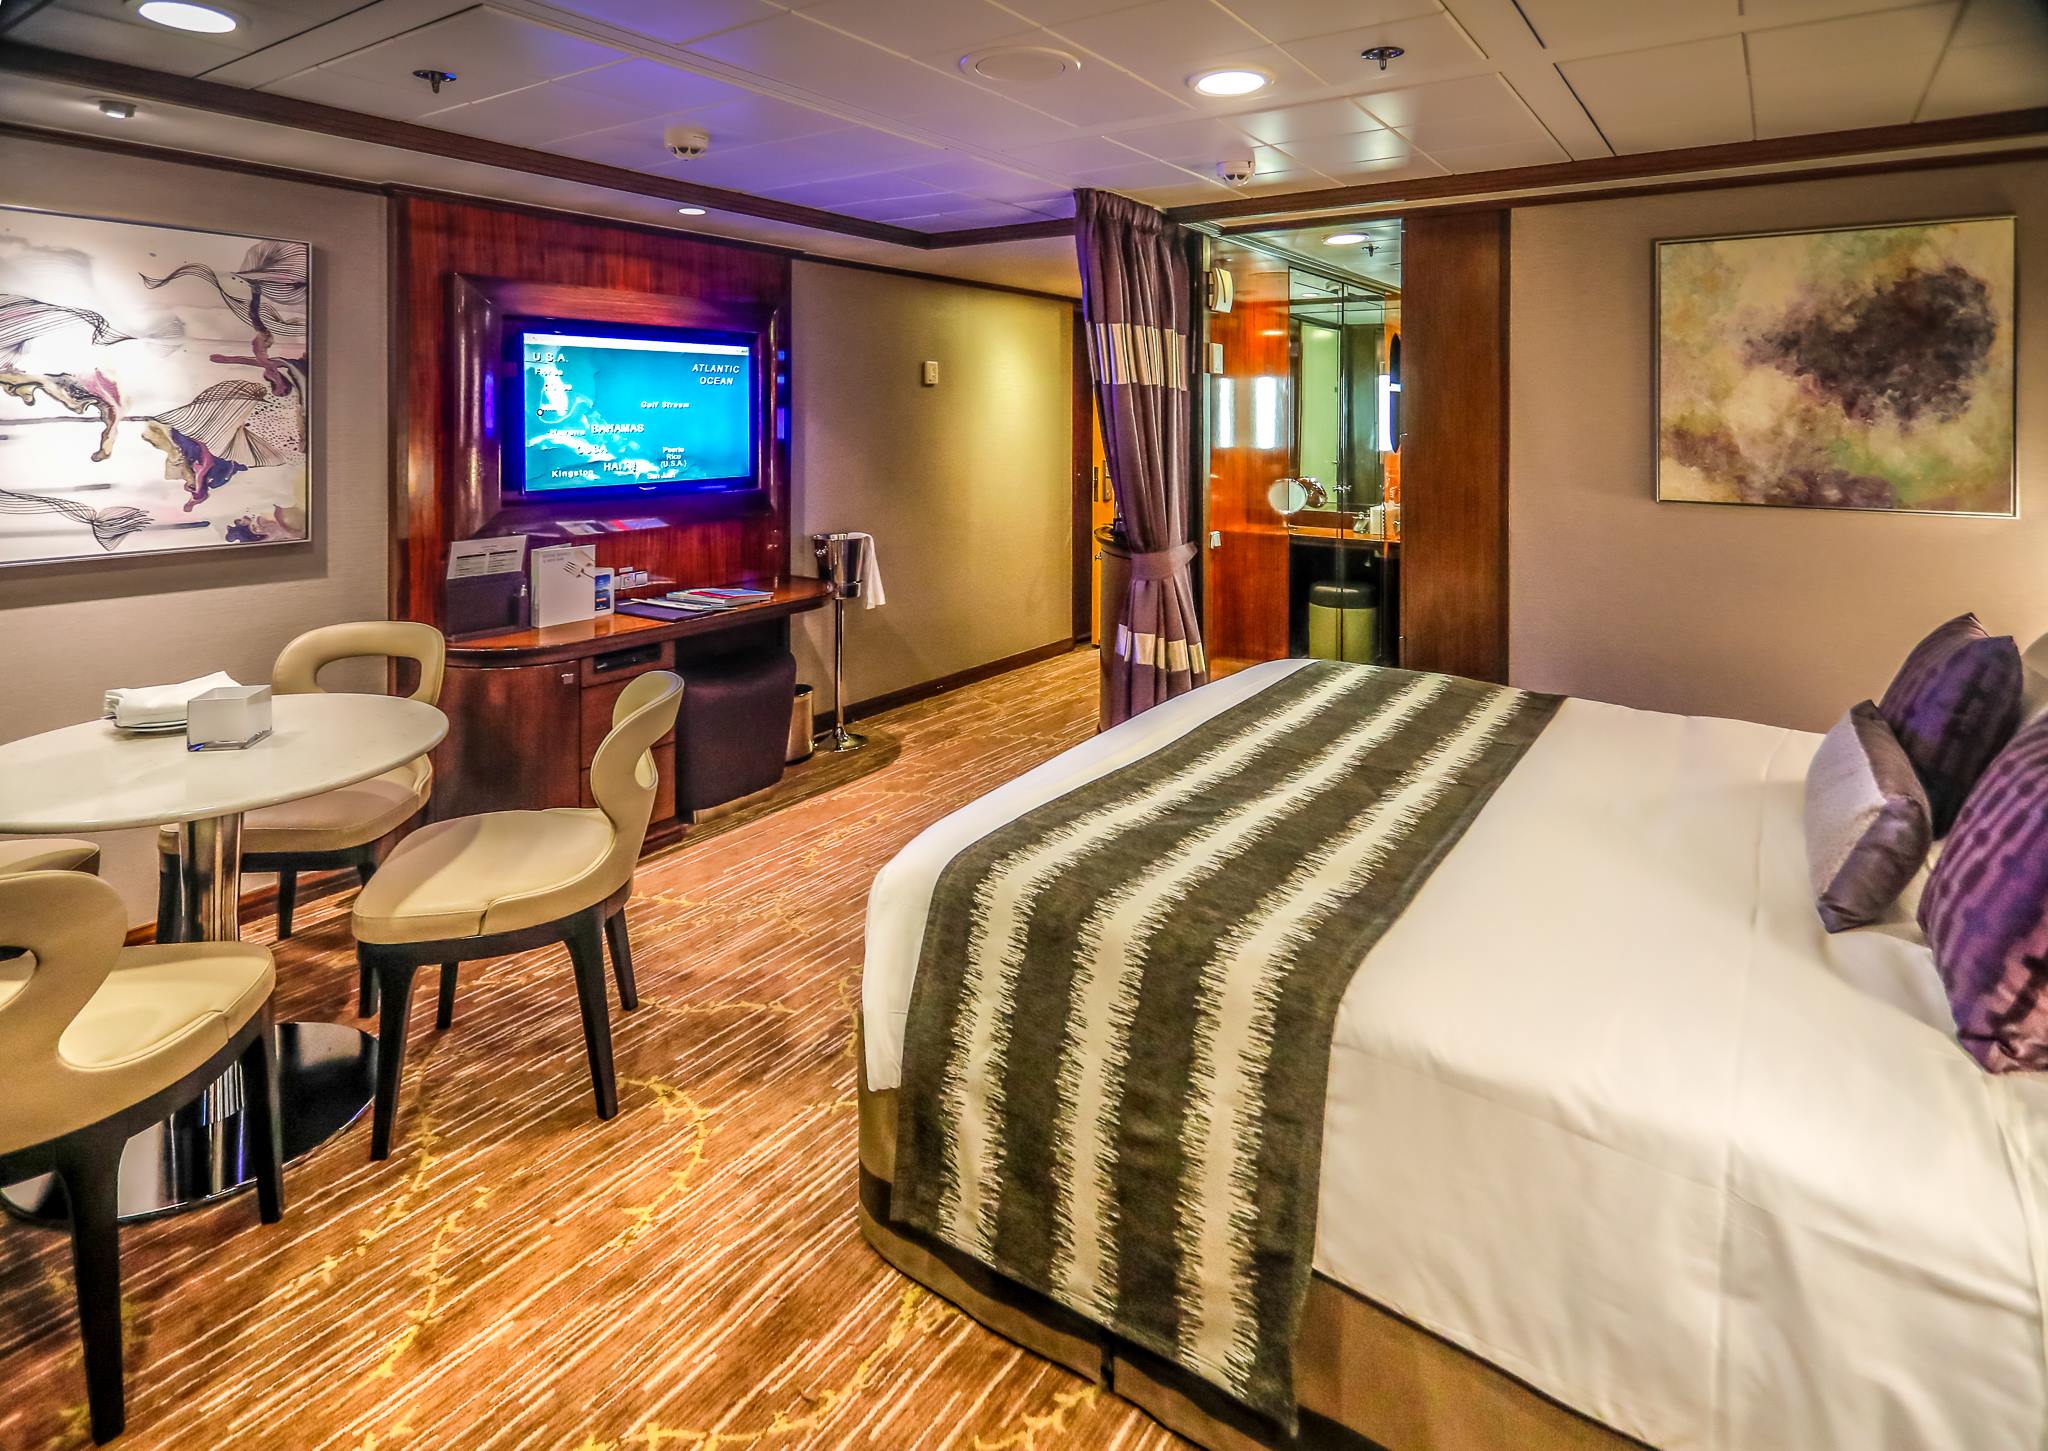 25 Tips to Save BIG on Your Next Cruise - Cruise Inner rooms